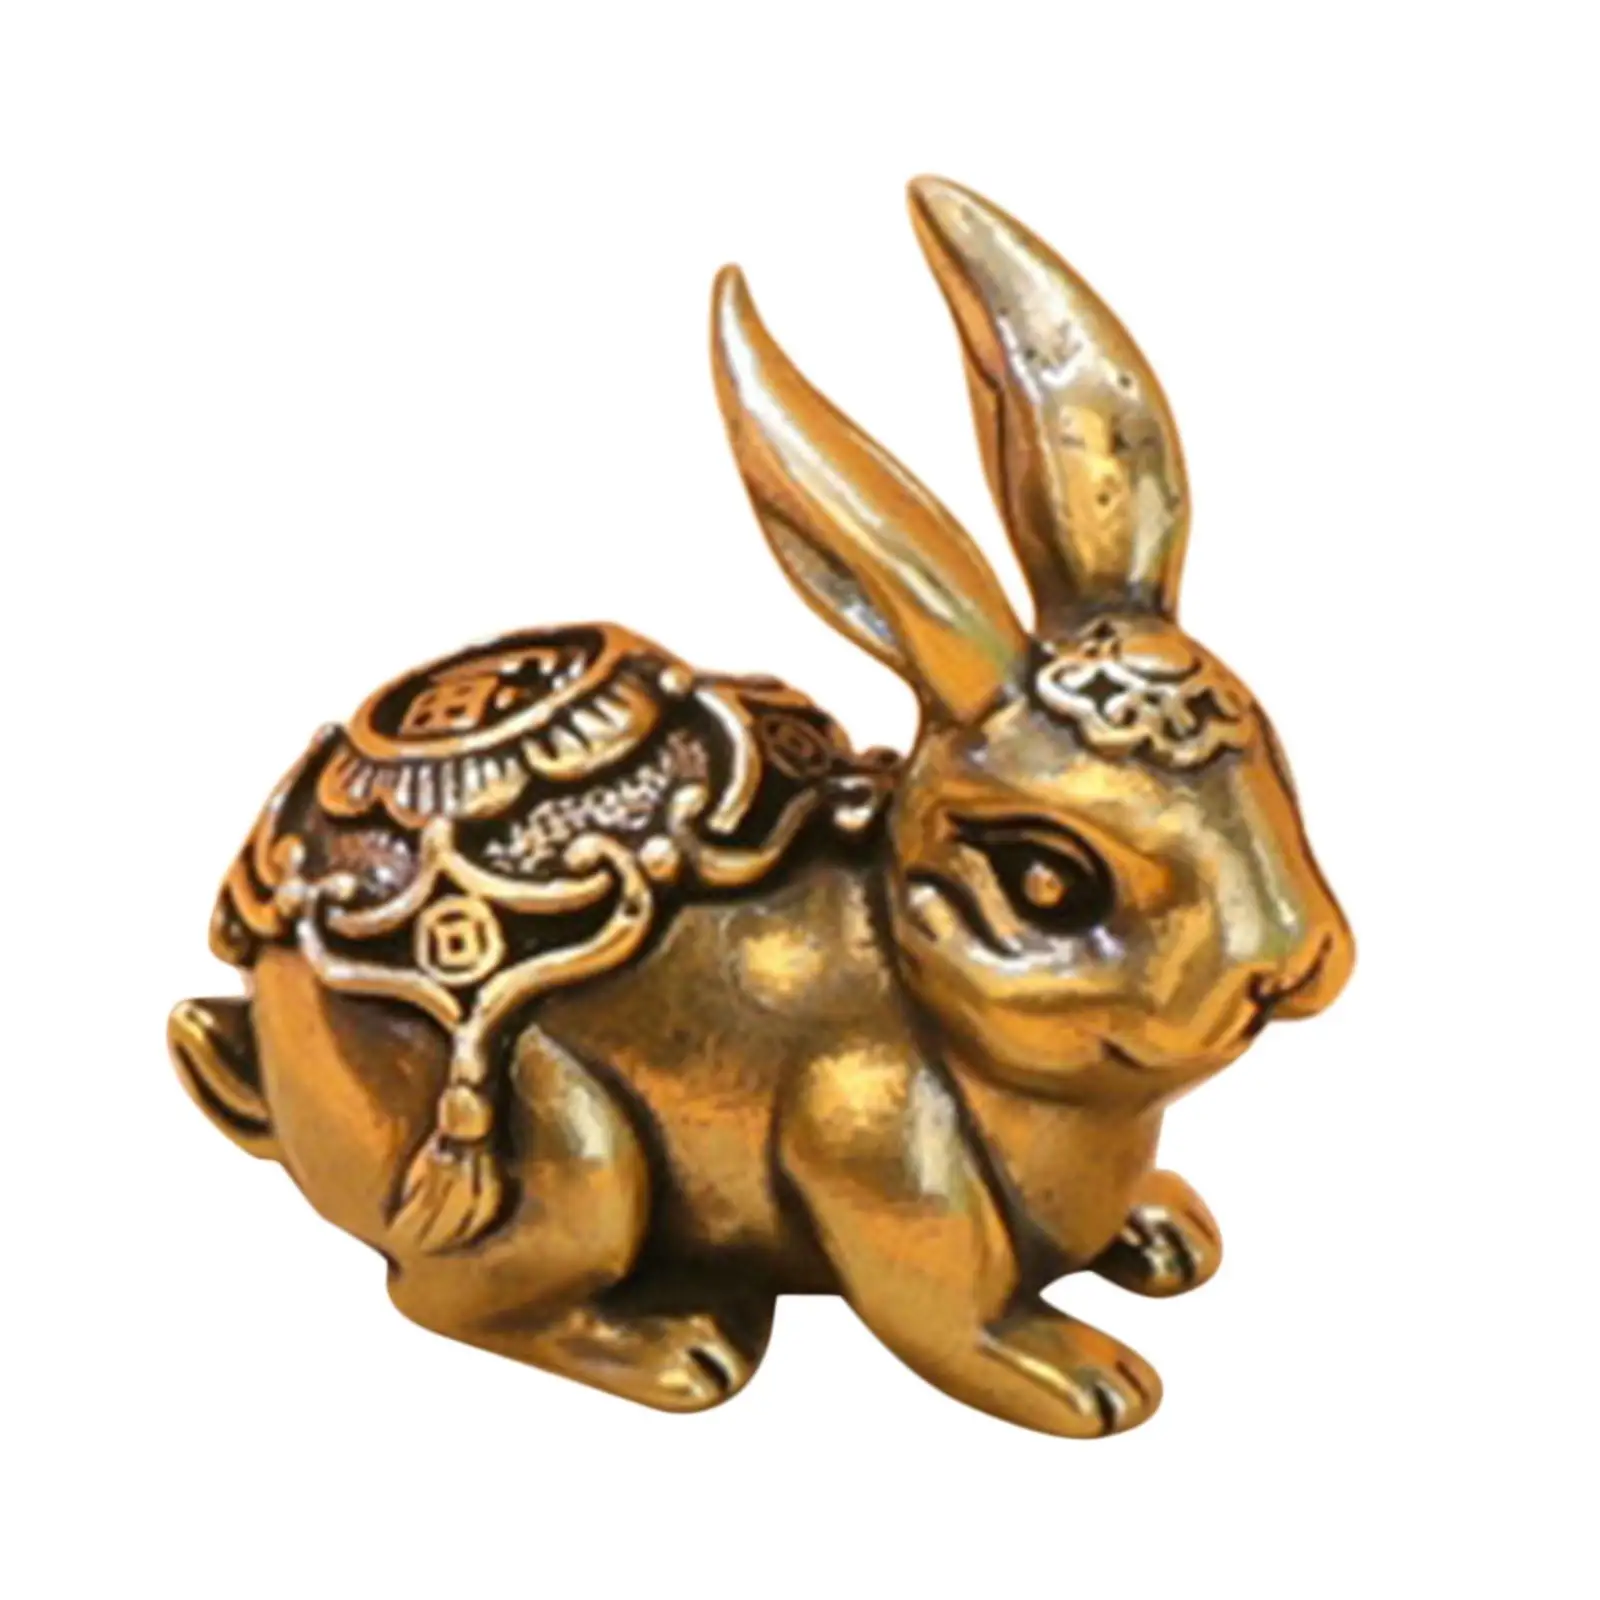 Rabbit Statue Animal Statue Party Supplies Crafts Small Rabbit Charm for Living Room Decoration